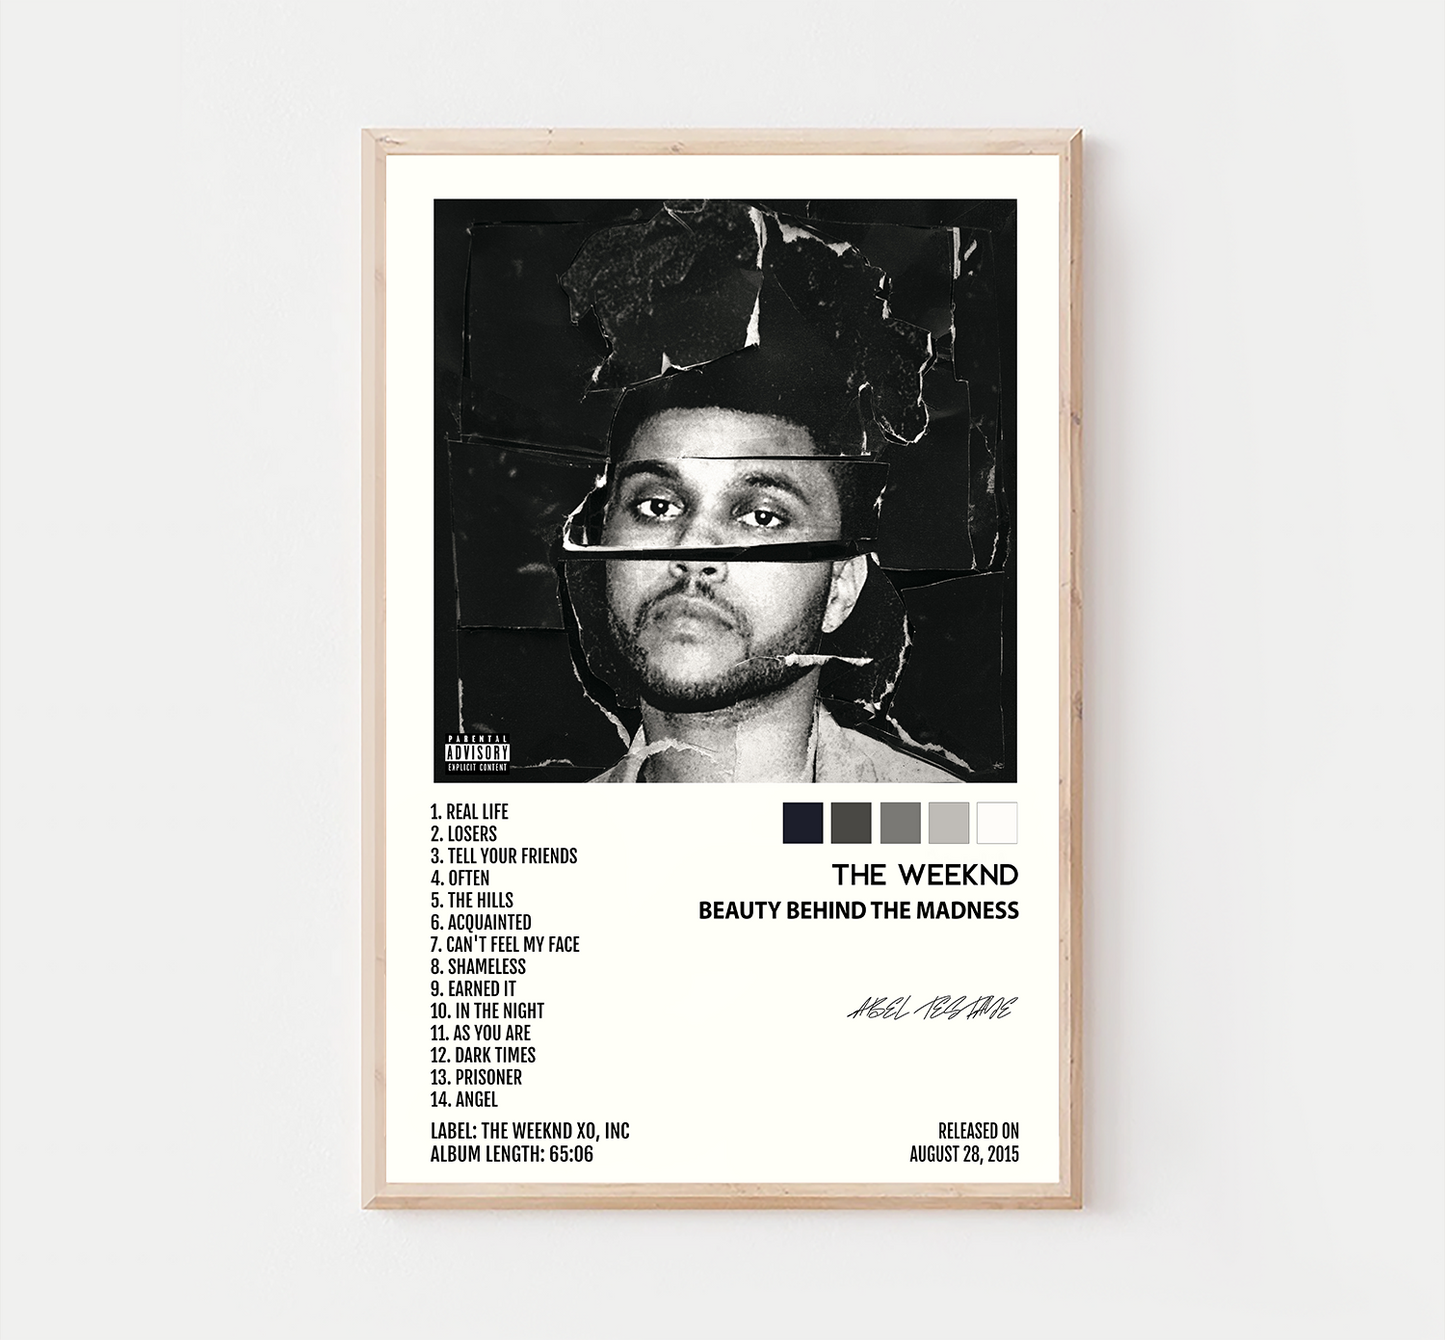 The Weeknd- Beauty Behind the Madness